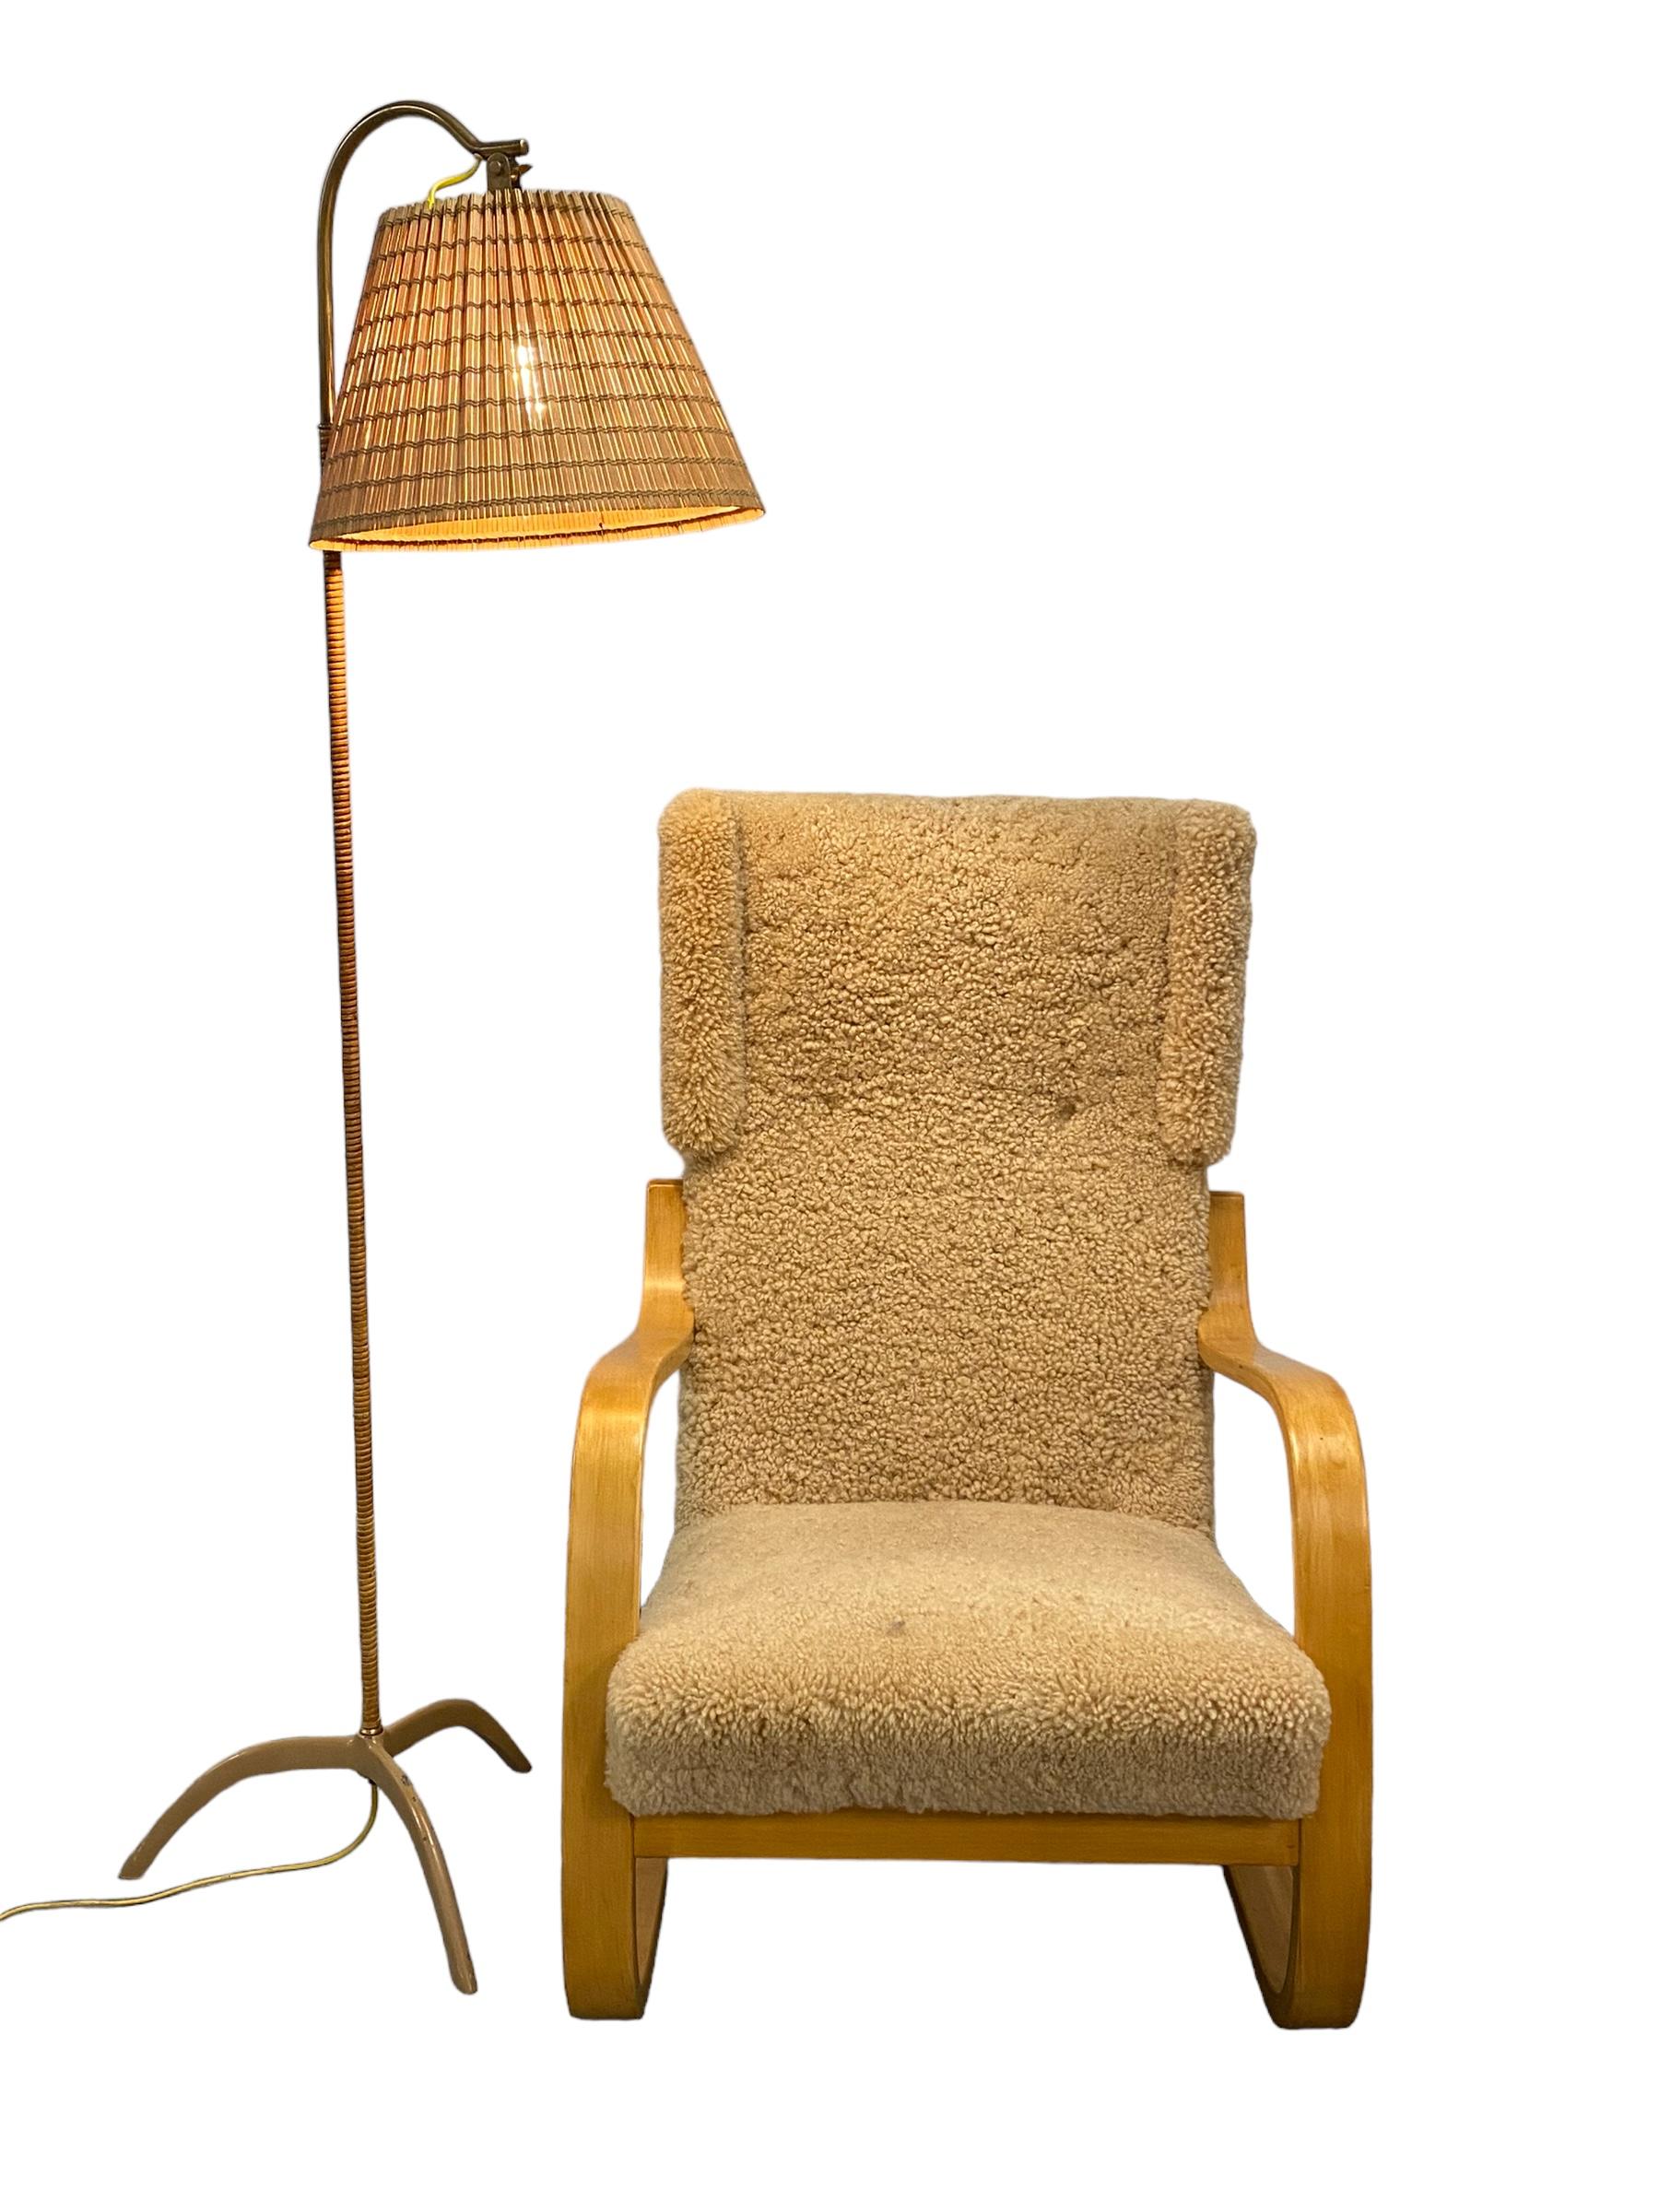 Lampadaire Paavo Tynell modèle. 9609, Taito Oy années 1950 en vente 5